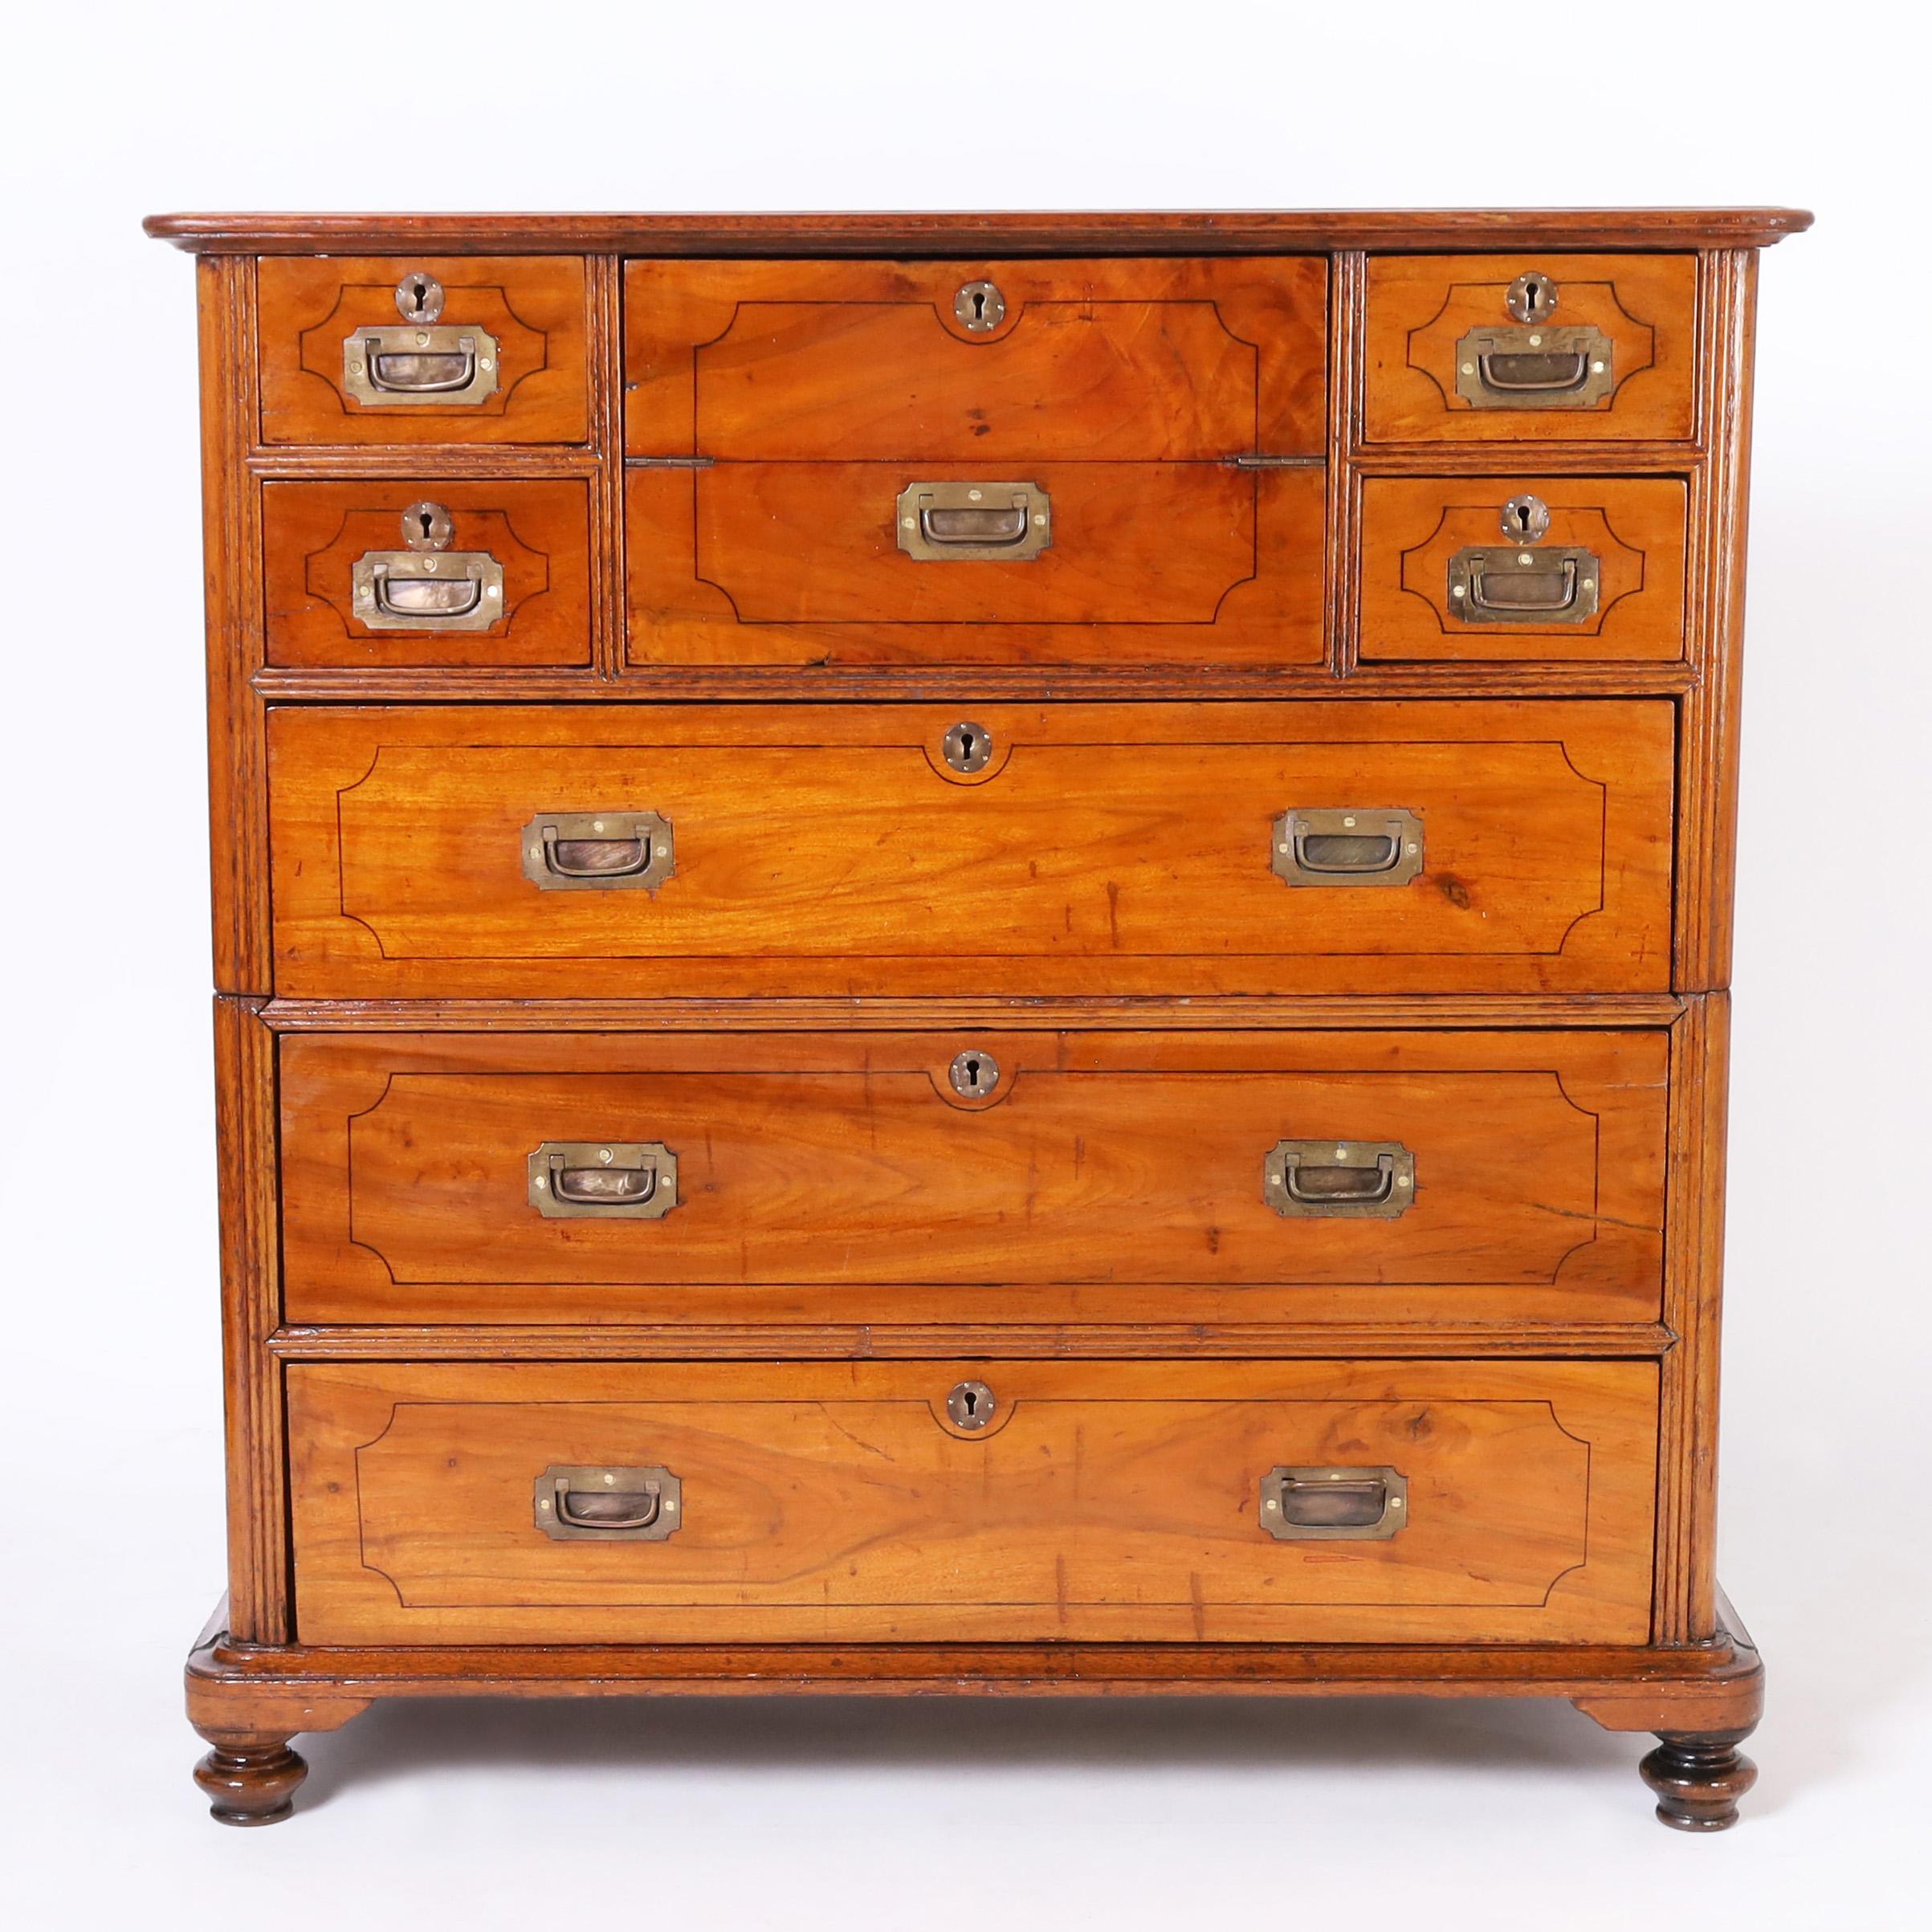 Rare and remarkable Anglo Chinese chest handcrafted in teak with seven drawers and a foldout desk, campaign brass hardware, and turned feet. French polished in the traditional old world manner.